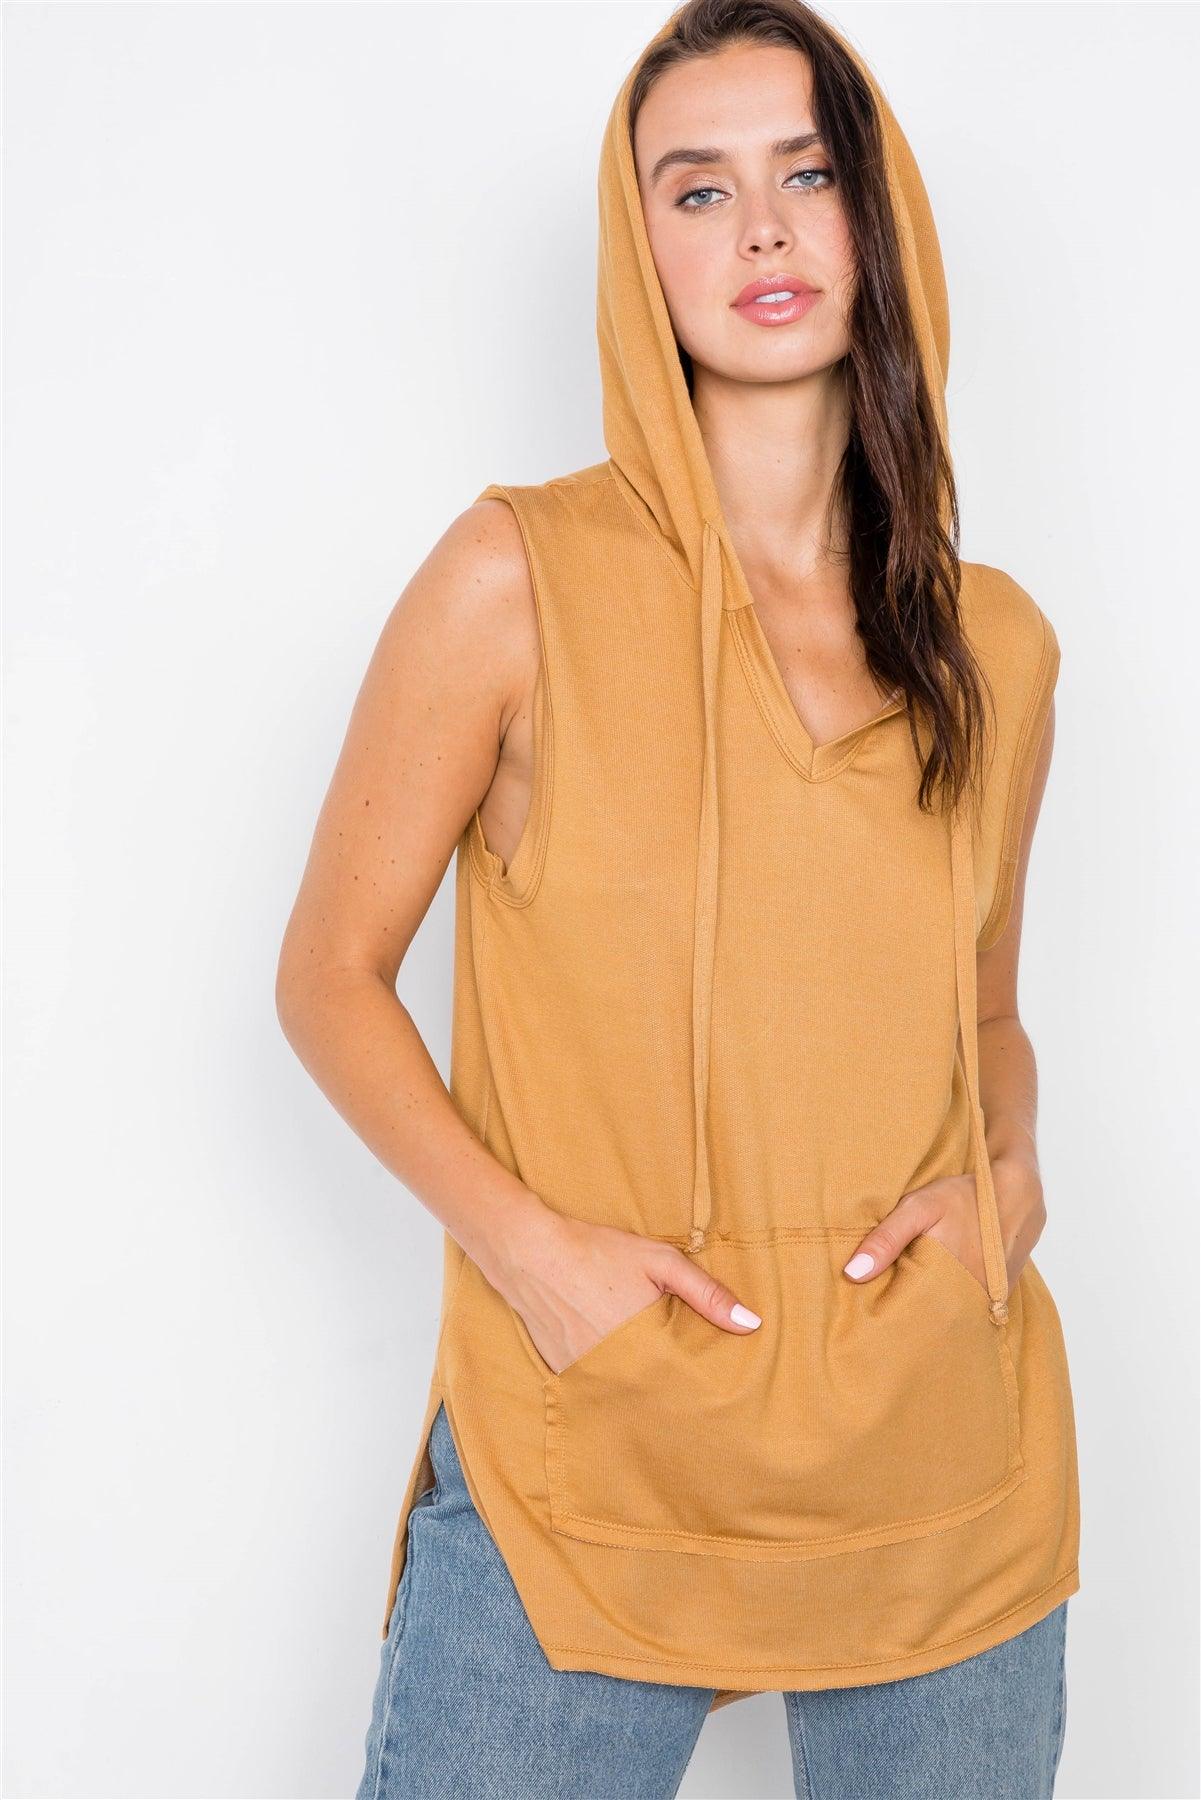 Caramel Sleeveless Hooded Front Pocket Muscle Top /2-2-2